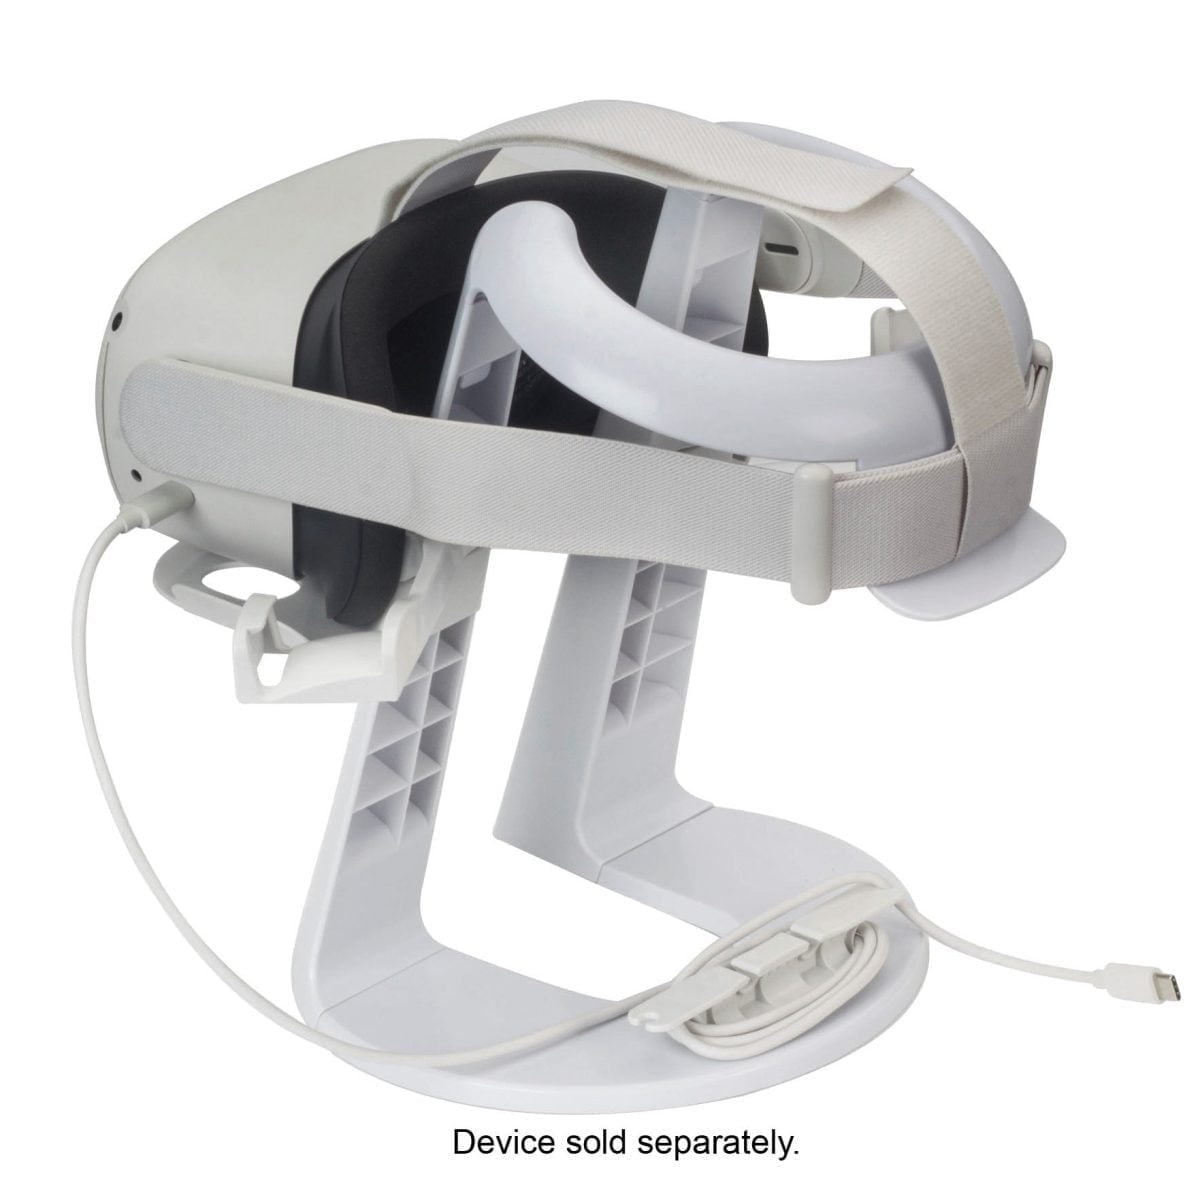 6473847Cv16D &Lt;H1&Gt;Stand For Oculus - White&Lt;/H1&Gt; The Insignia Oculus Stand Is Specially Designed For Displaying And Storing Your Oculus Vr Headset And Touch Controllers. Built With A No-Slip Base, This Stand Is A Safe And Stable To Place To Store And Organize Your Vr Headset, Controllers And Cables. Compatible With Most Vr Systems Including The Oculus Series (Oculus Rift/Rift S/Quest/Quest 2) Vr Headset And Controllers Oculus Stand Insignia Stand For Oculus - White